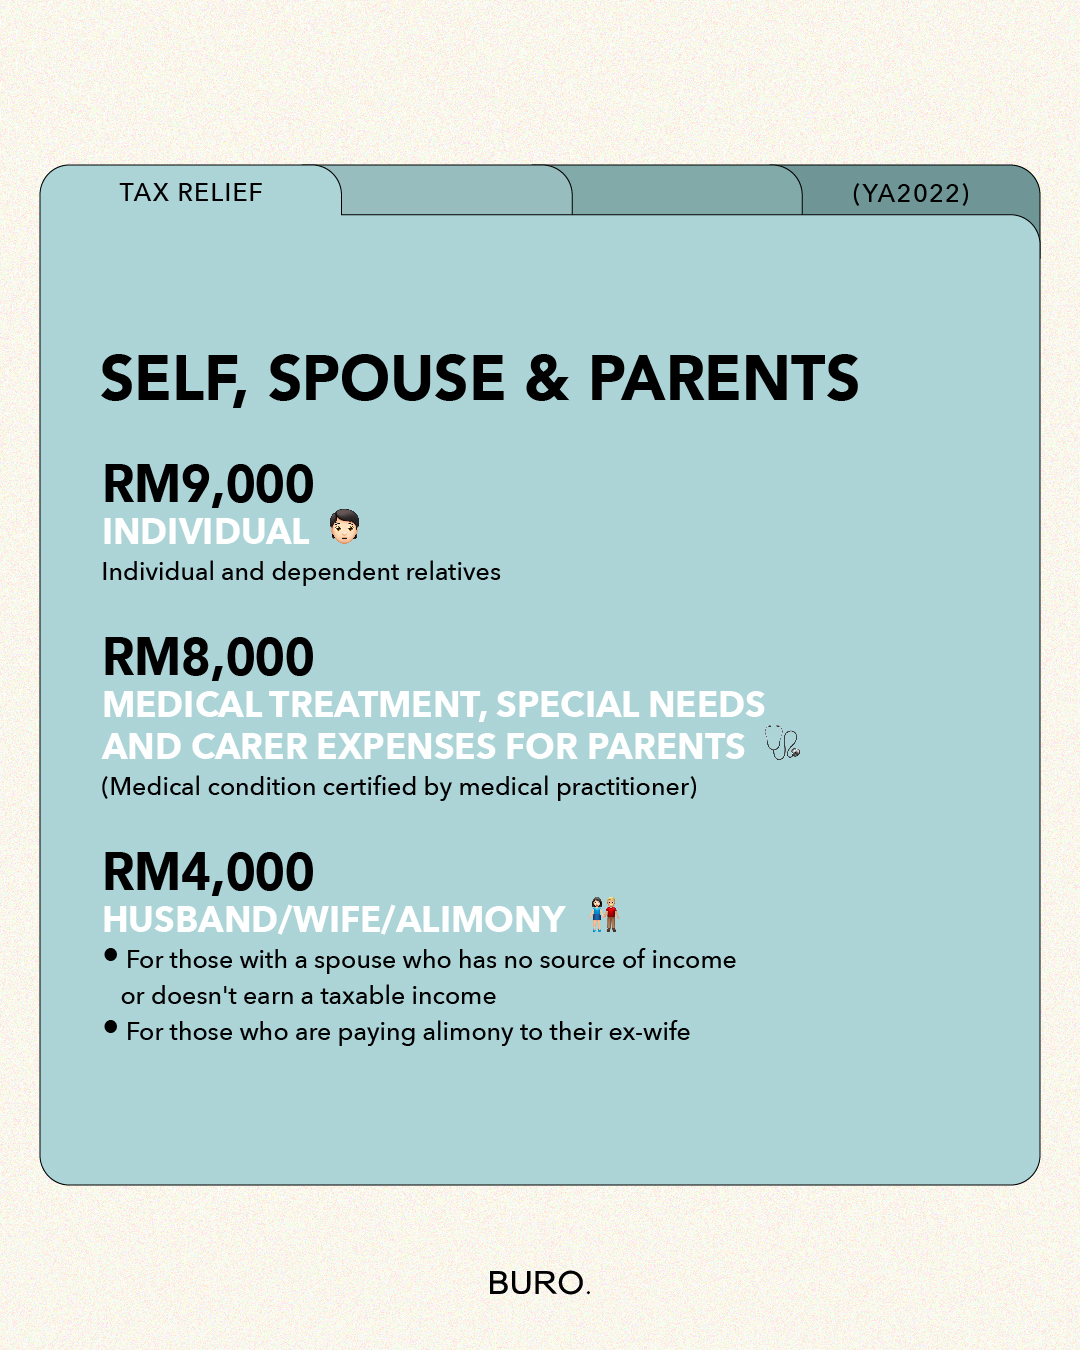 Malaysia Income Tax Here Are The Tax Reliefs To Claim For YA 2022